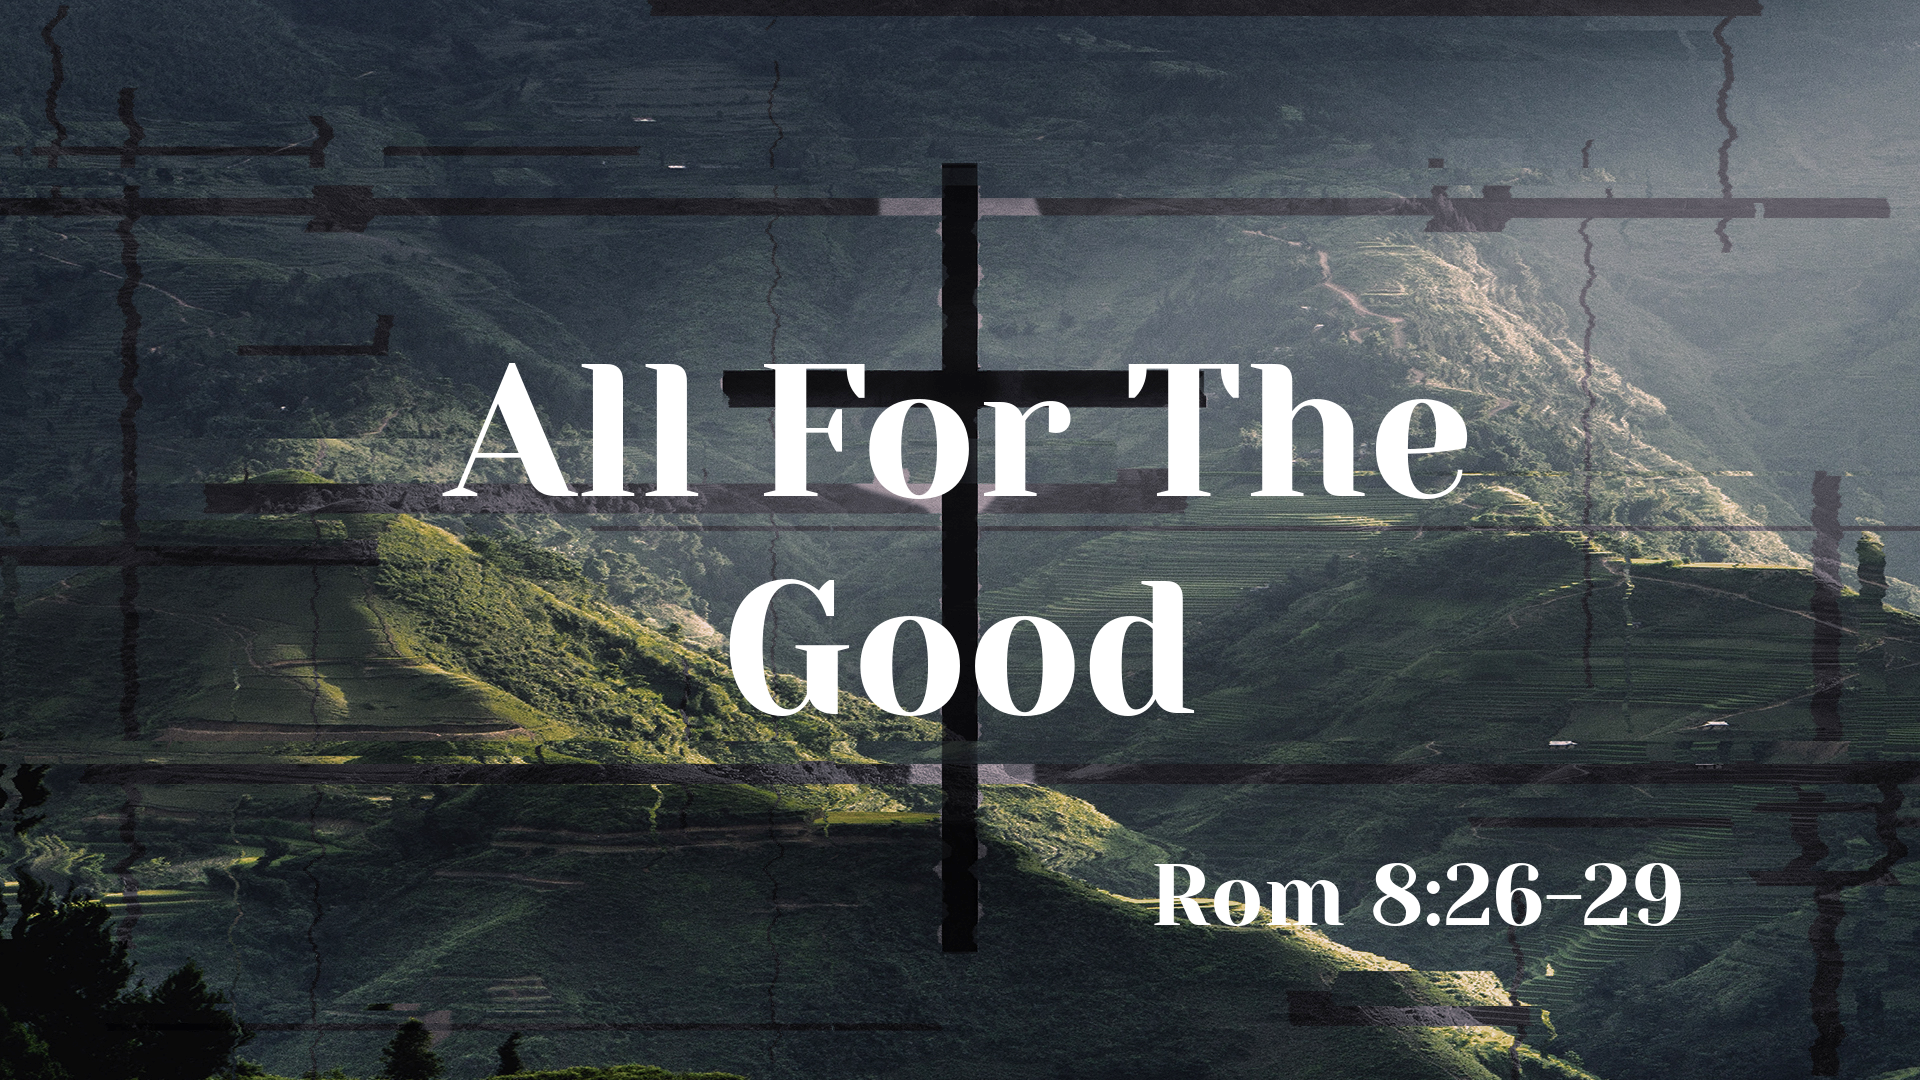 Apr 05, 2020 - All for The Good (Video)